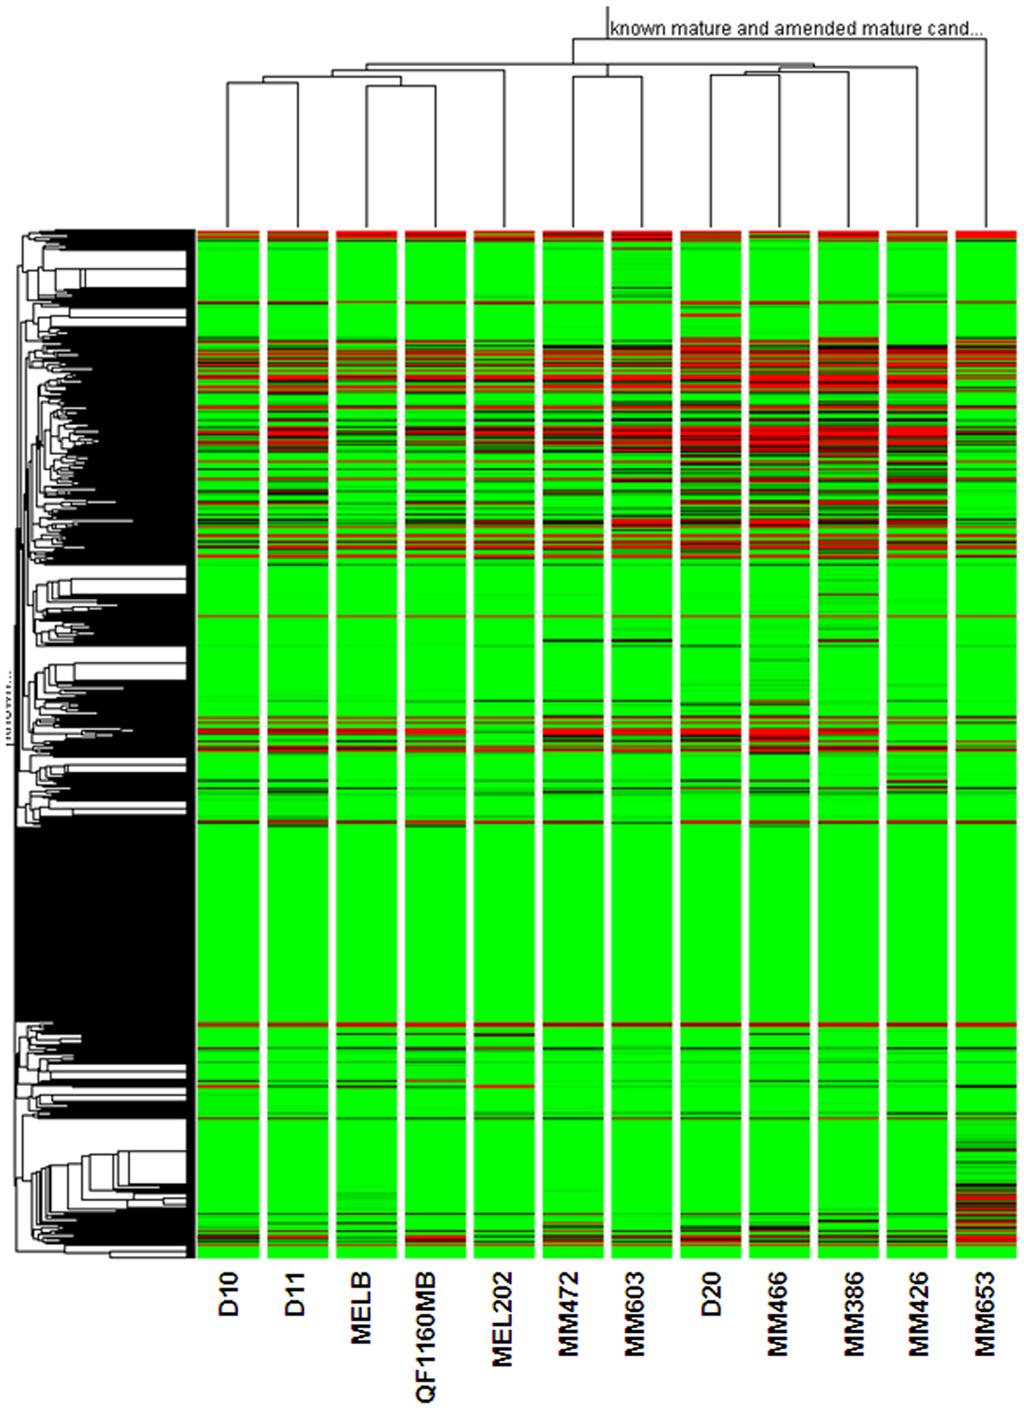 Small RNA-Seq - primary target: micrornas Beyond micrornas Characterization of the Melanoma mirnaome by Deep Sequencing Profiling novel mirnas